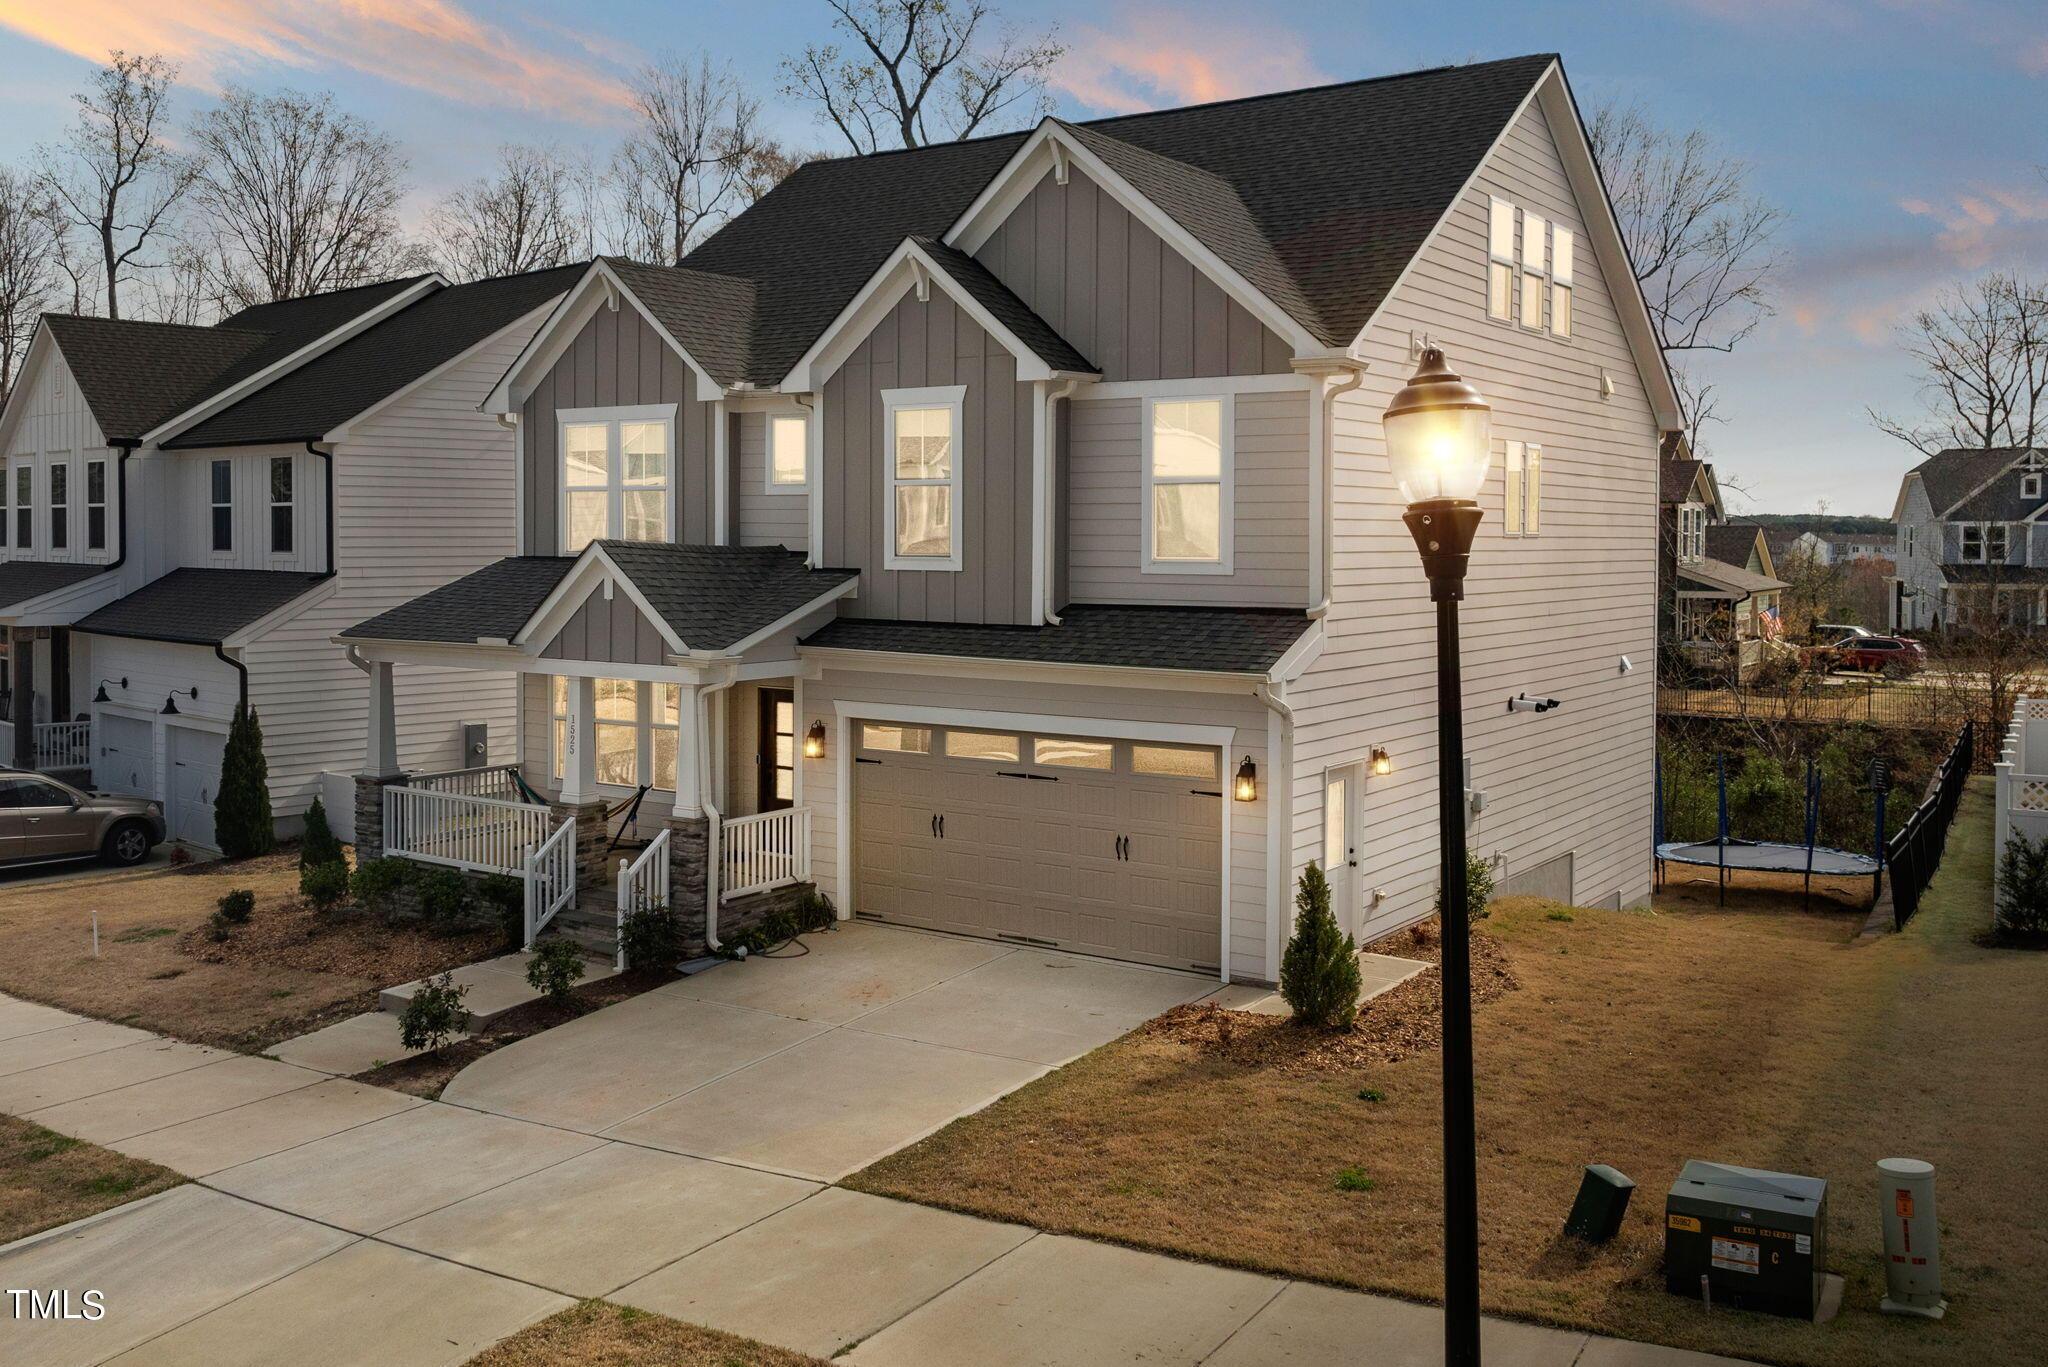 Photo one of 1525 Holding Village Way Wake Forest NC 27587 | MLS 10018428